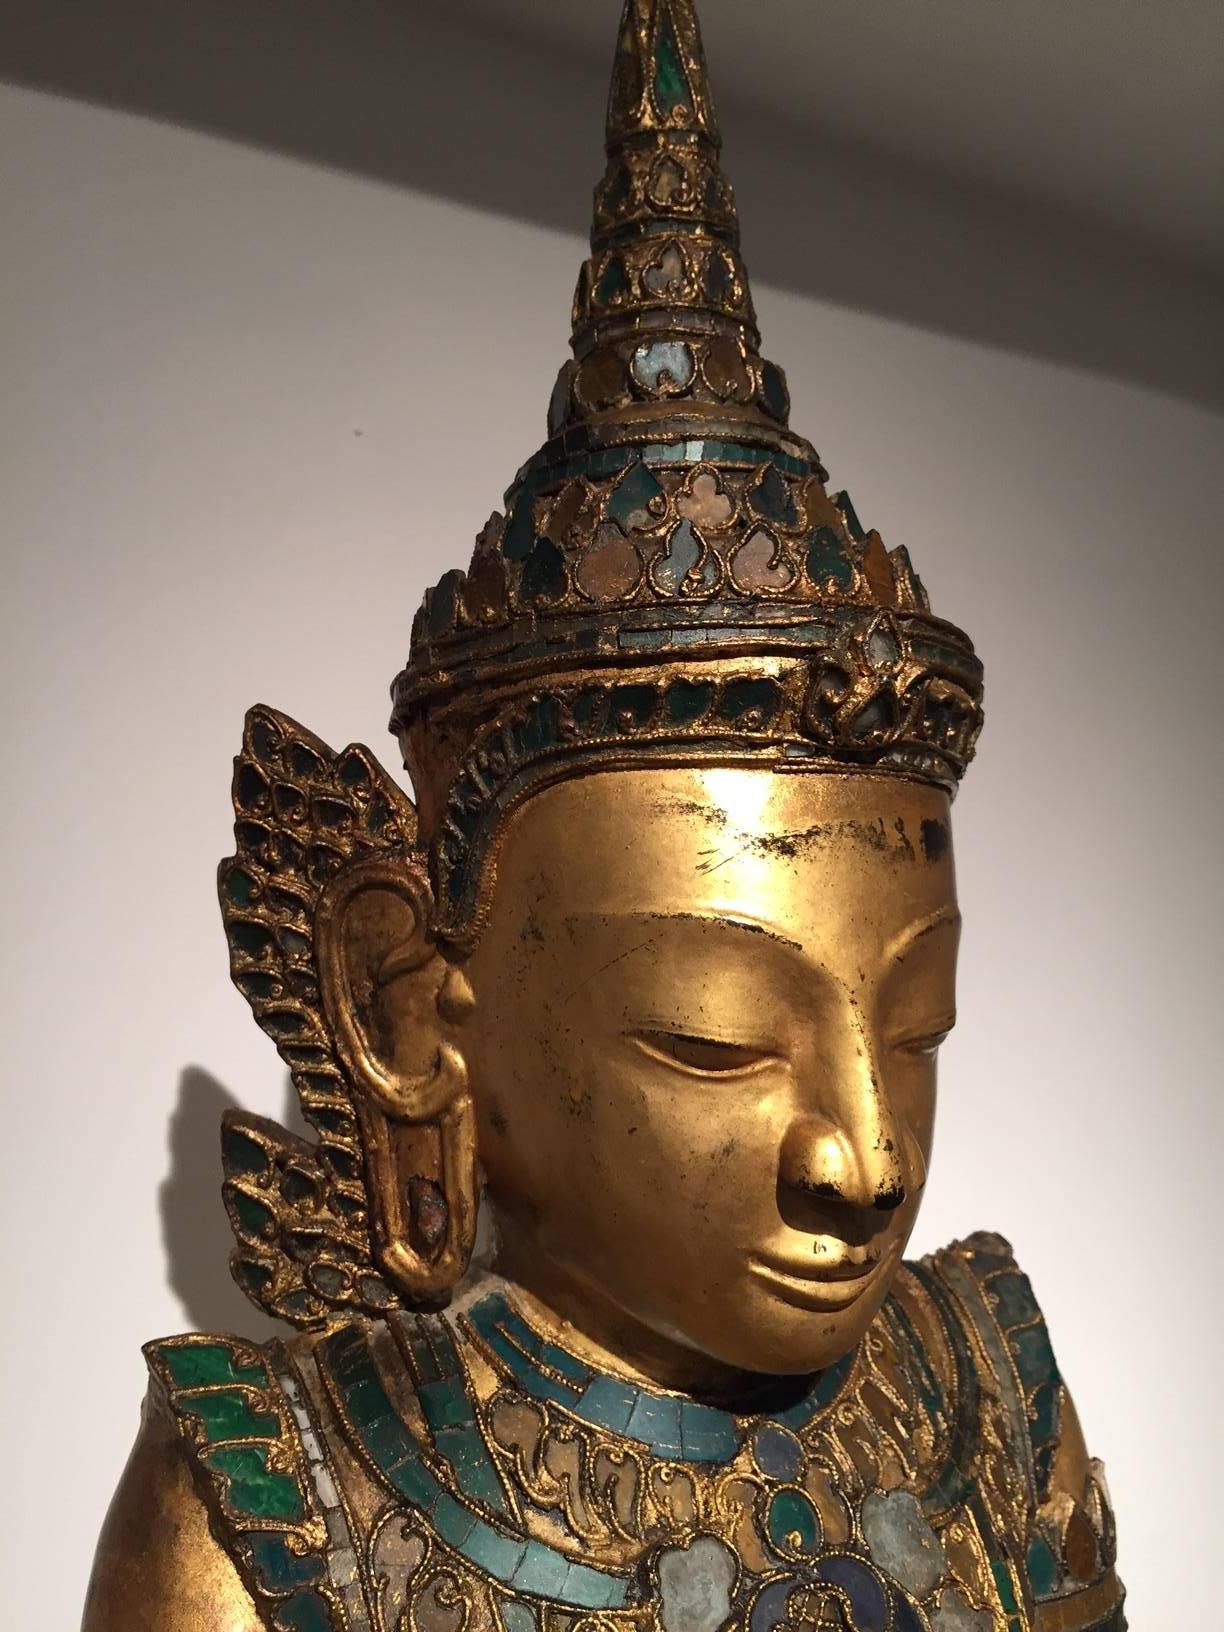 Early 19th Century, Gilt Lacquer with Glass Inlay Crowned Buddha, Thailand 1